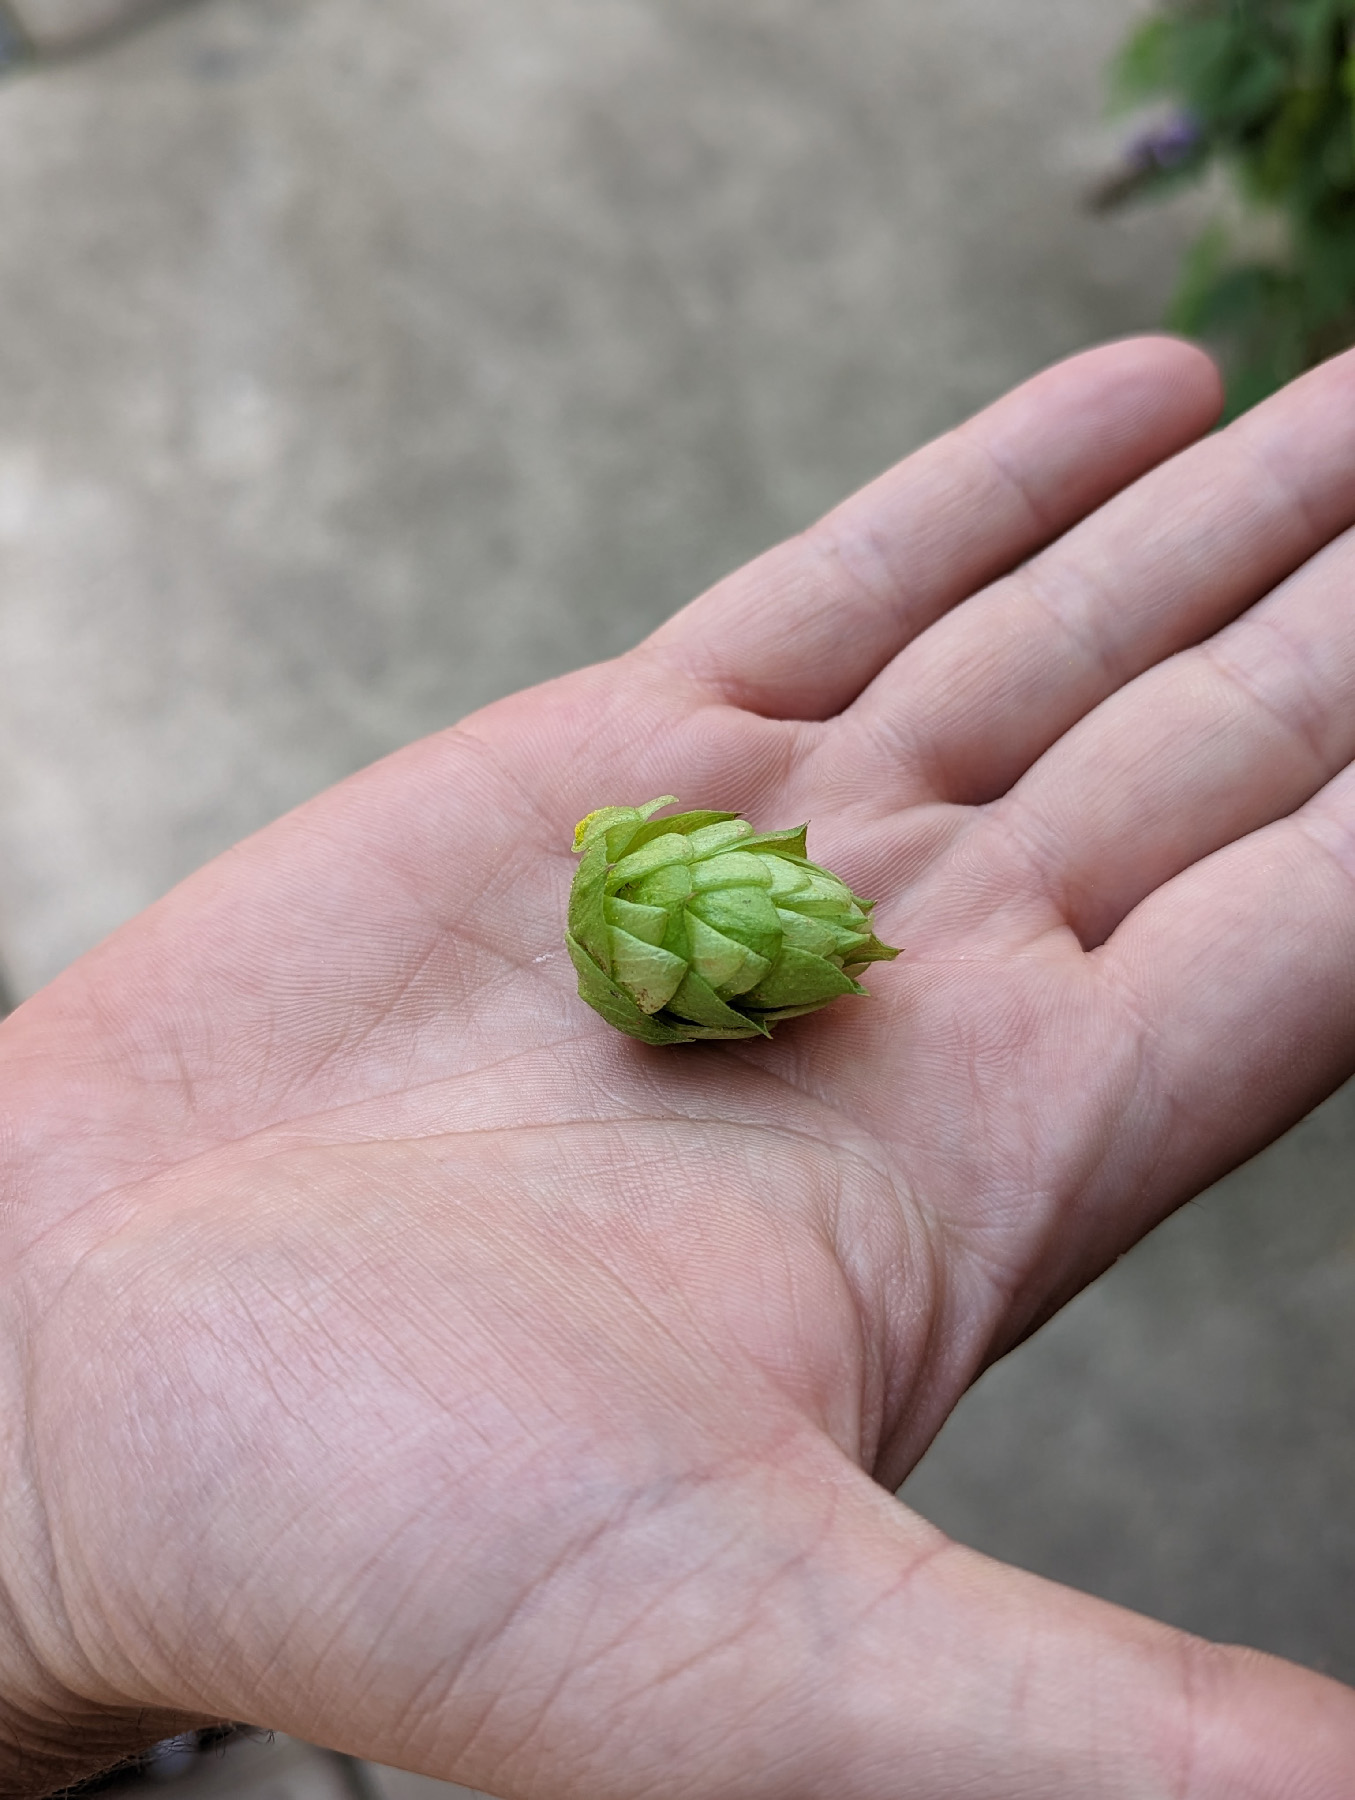 Hop is the plant, and hops are the flowers that give beer its bitter taste and fruity flavors.